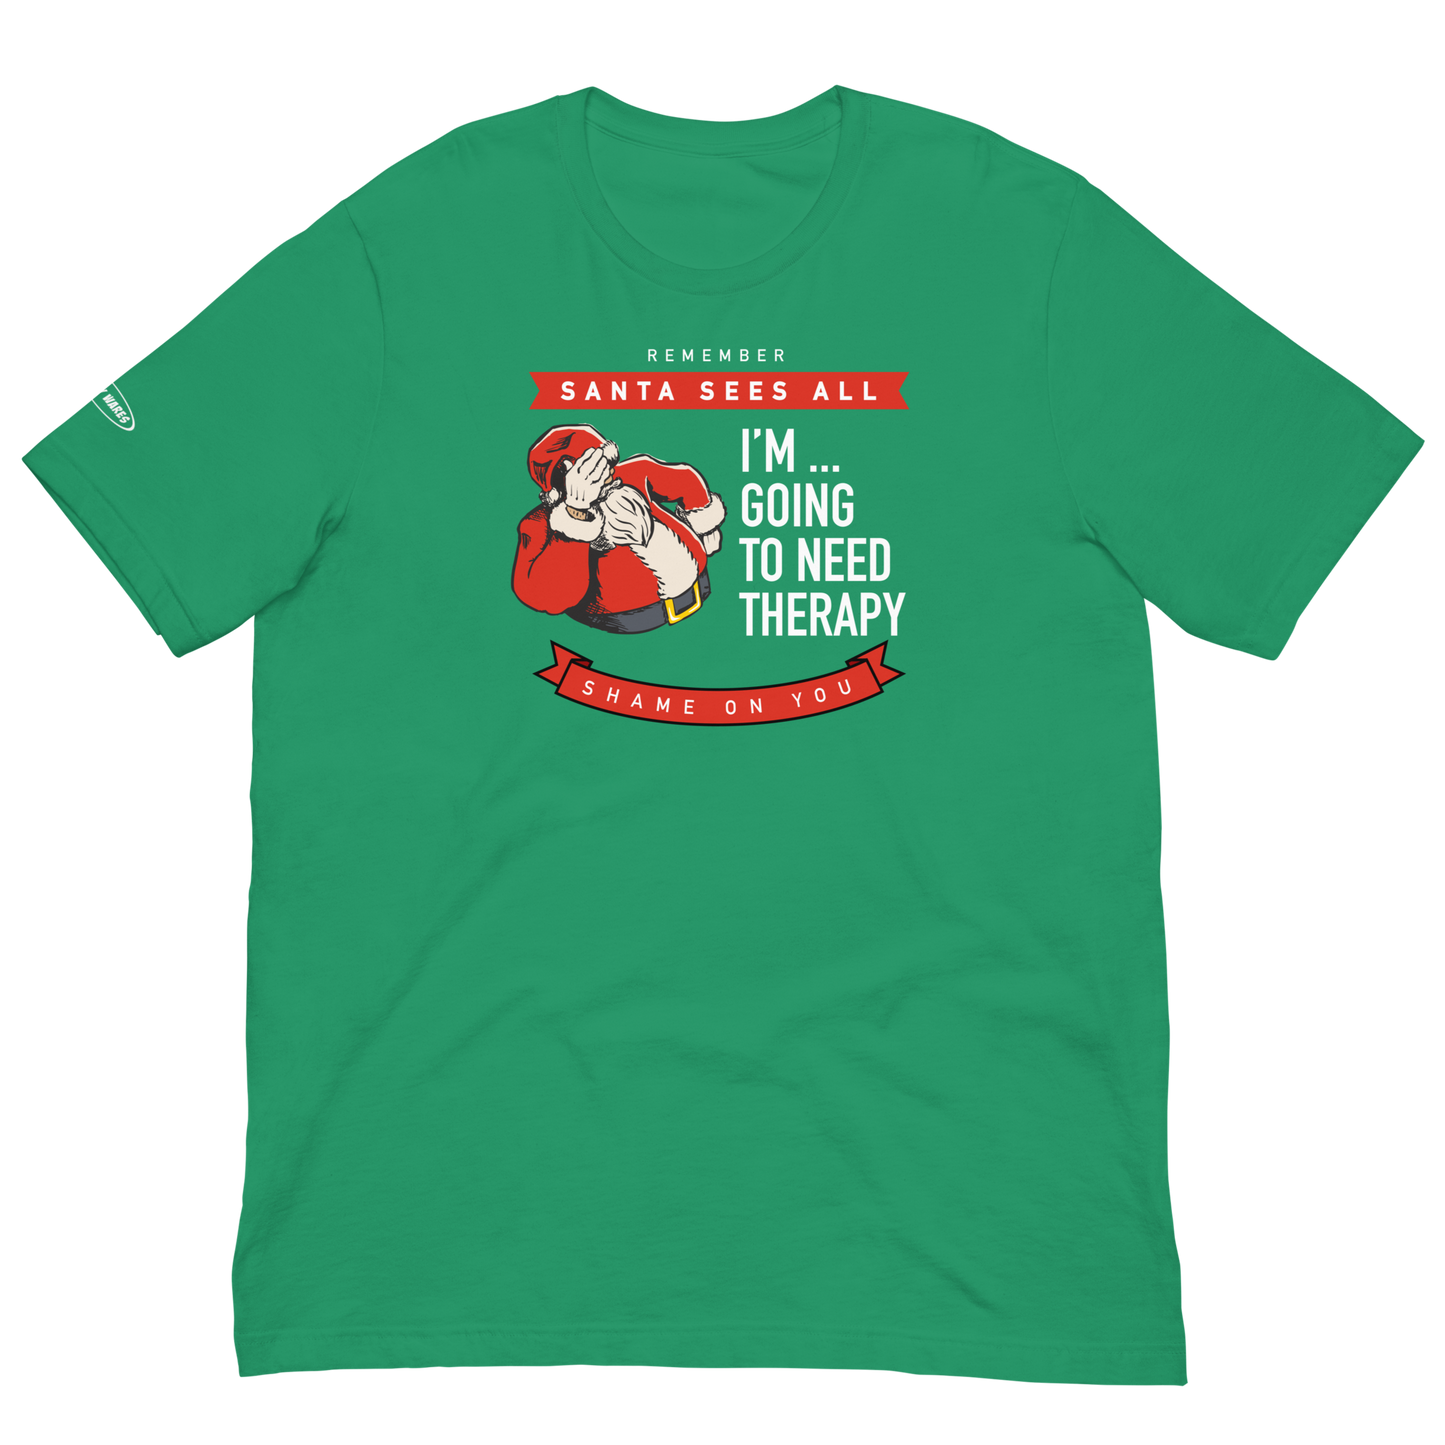 CHRISTMAS - Santa Sees All - I'm Going to Need Therapy - Funny t-shirt